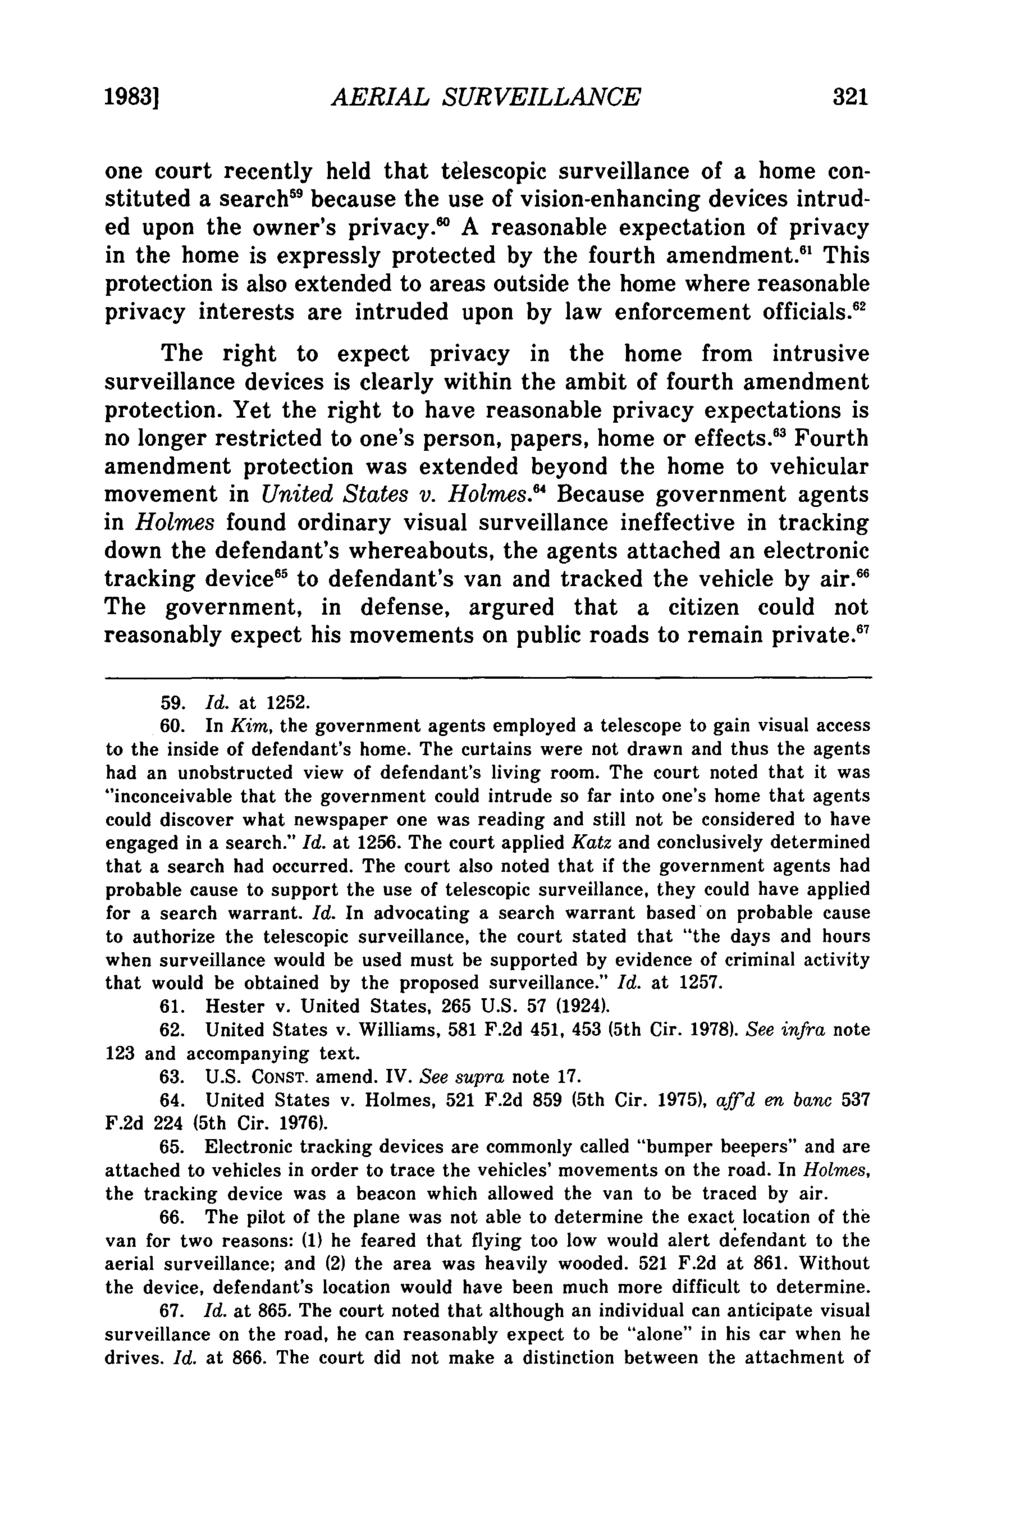 19831 Horvath: Fourth Amendment Implications of Warrantless Aerial Surveillance AERIAL SURVEILLANCE one court recently held that telescopic surveillance of a home constituted a search 59 because the